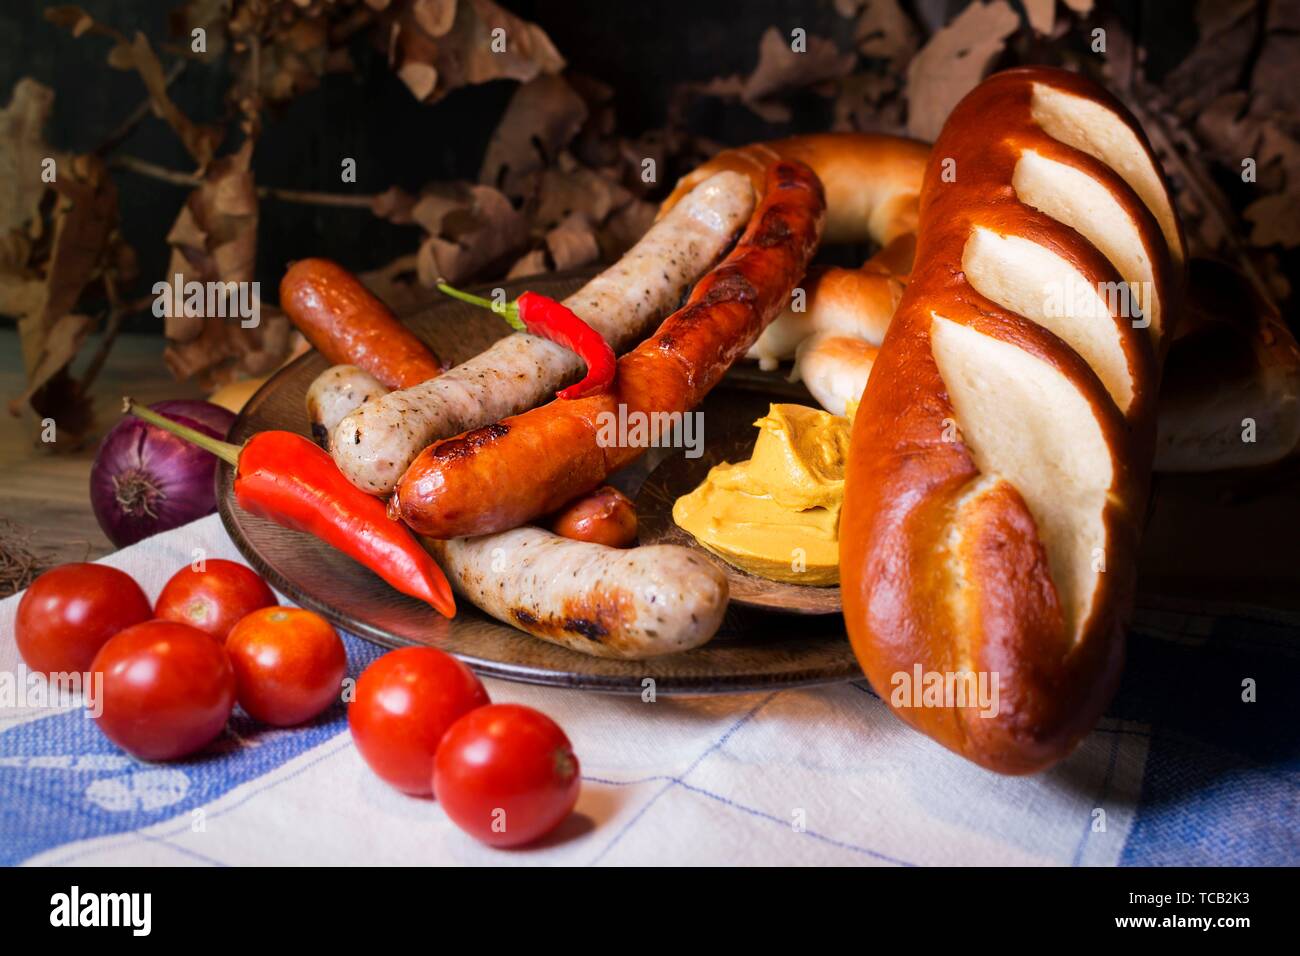 Bavarian White And Red Sausages With Mustard, Bavarian Buns and Pretzels At The Table. October Fest Concept. Stock Photo